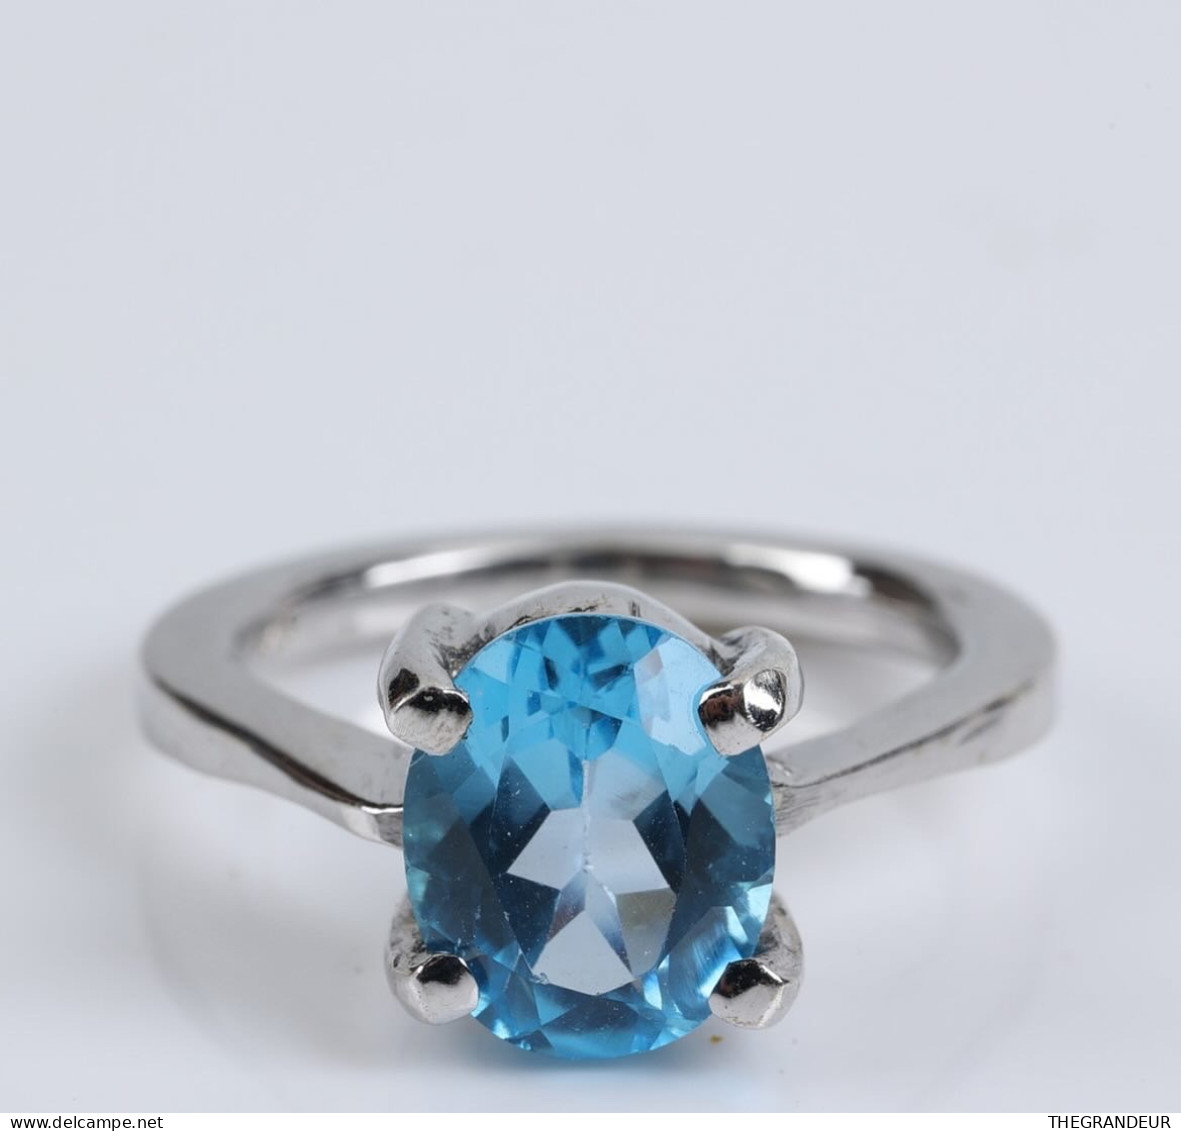 Ring Sterling Silver Ring 925 With Blue Topaz - Bagues